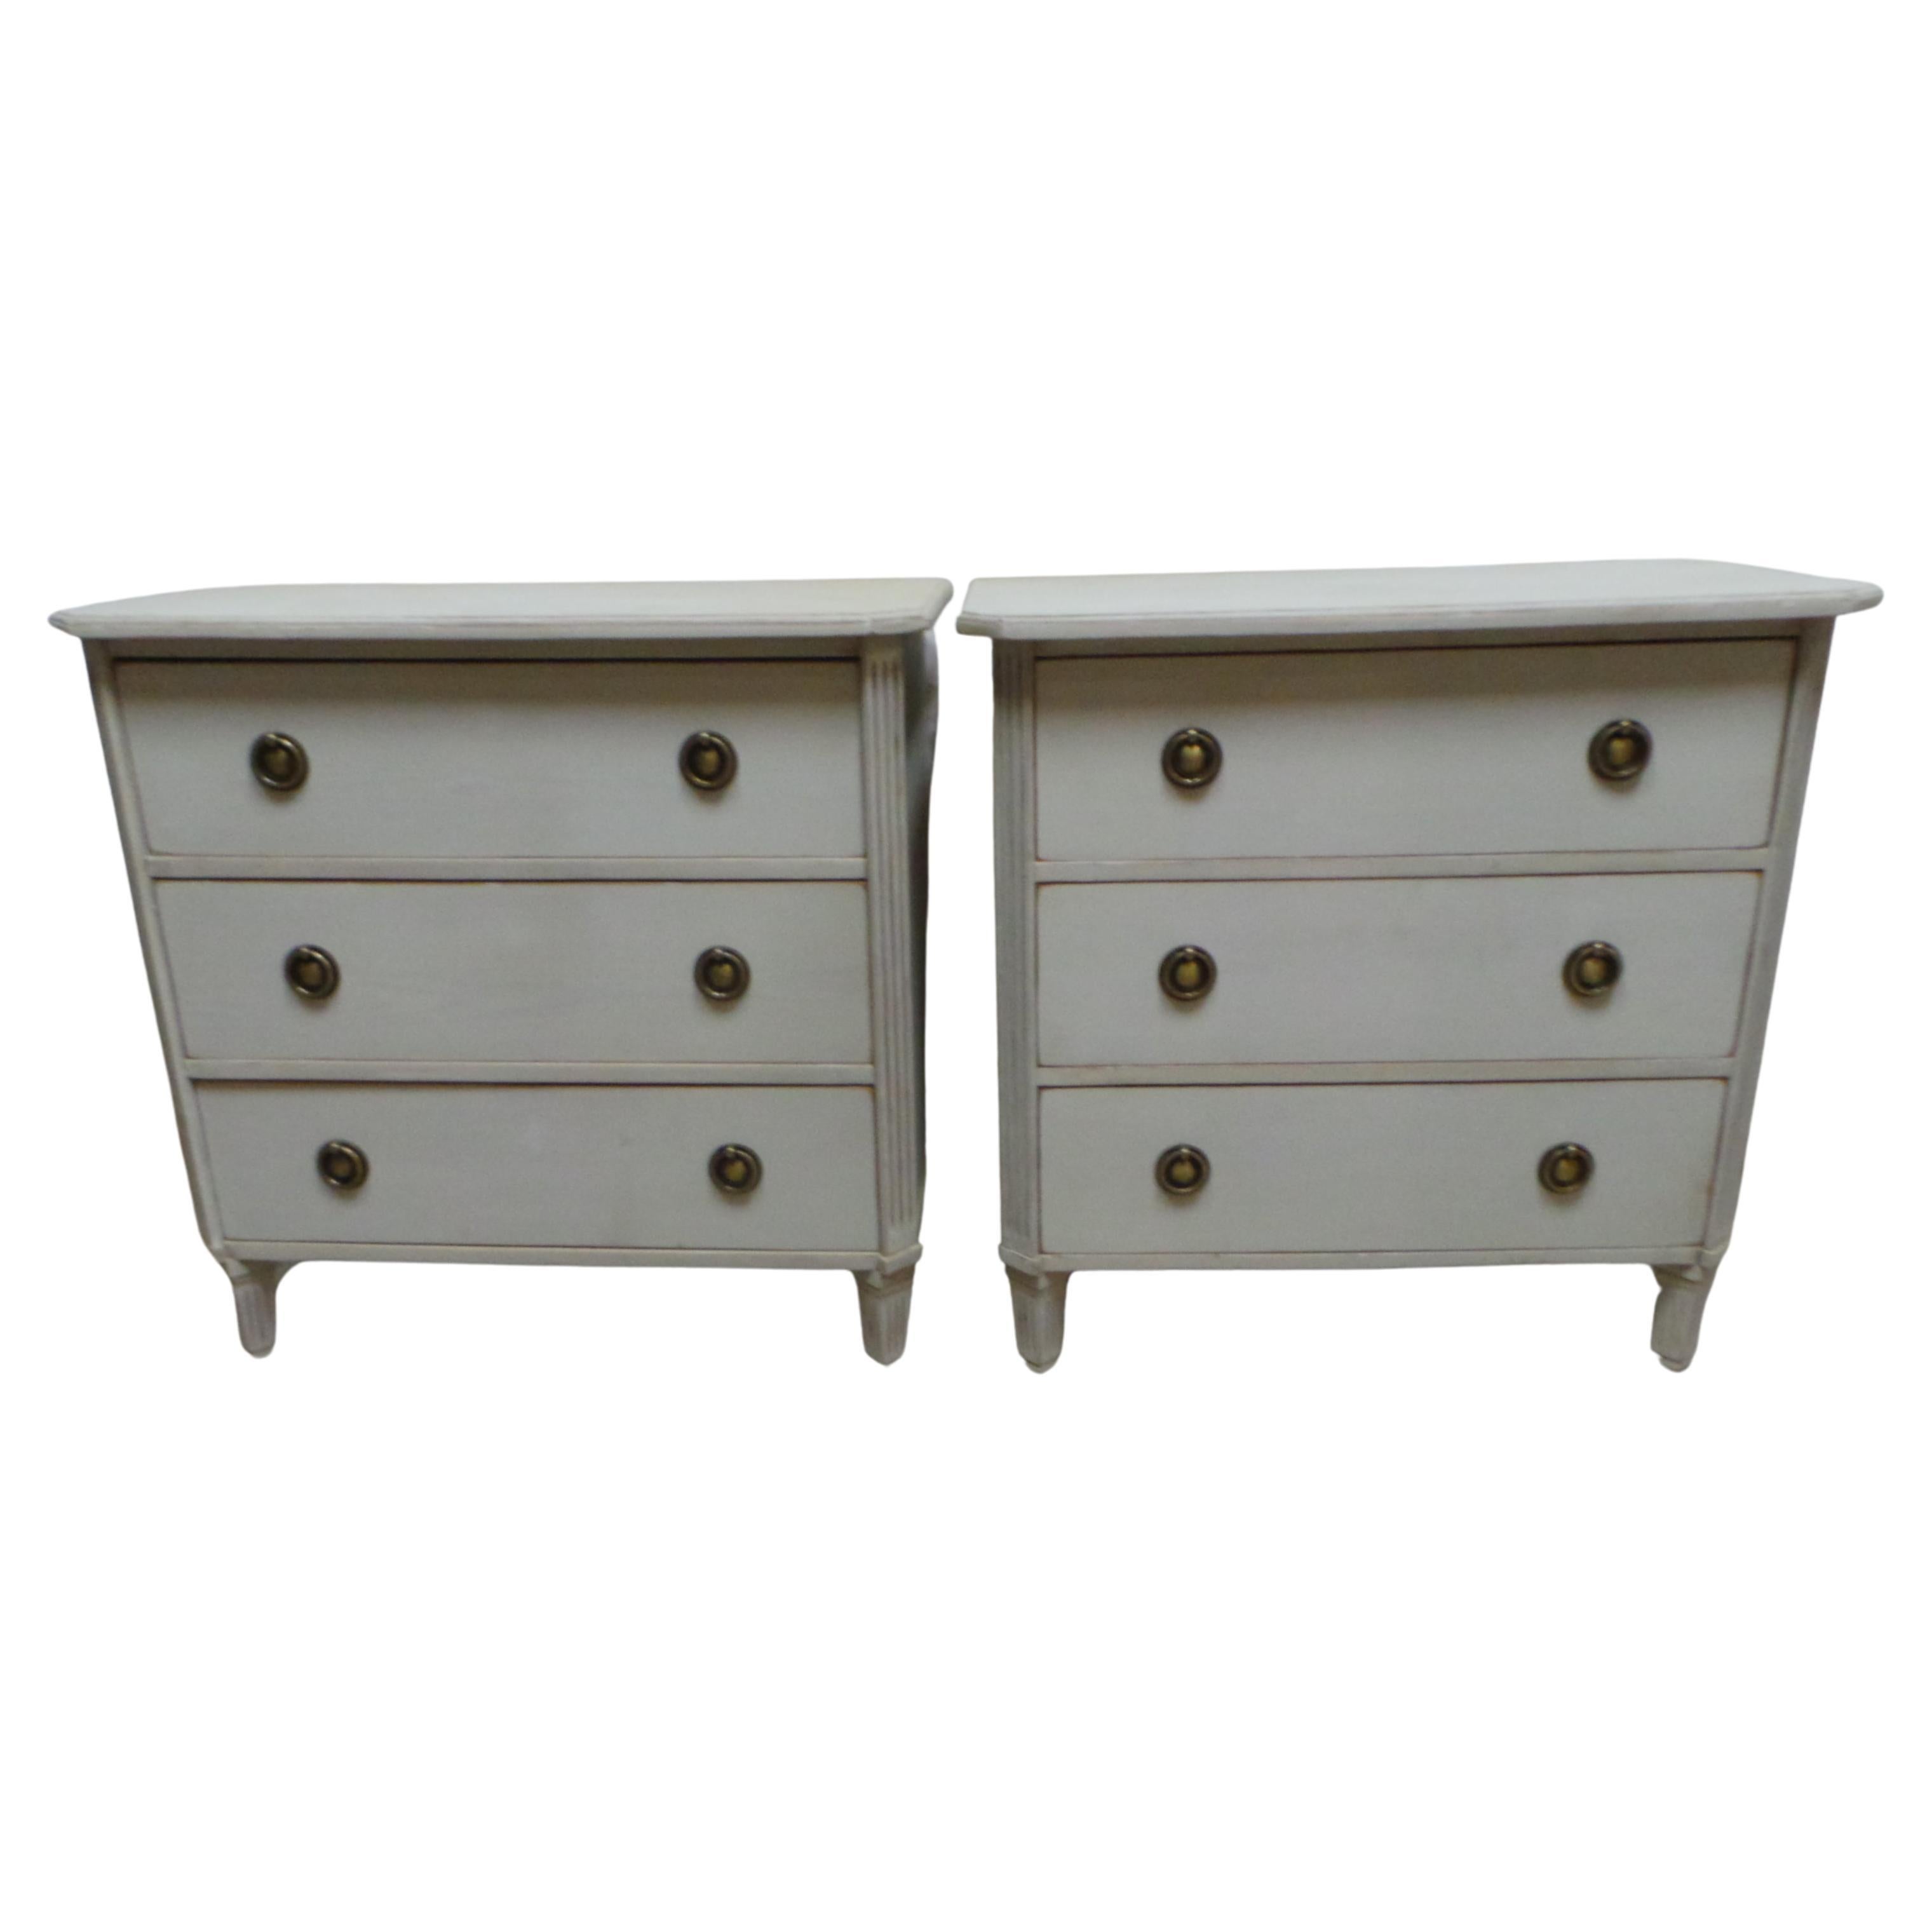 2 Swedish Gustavian Style 3 Drawer Chest Of Drawers For Sale